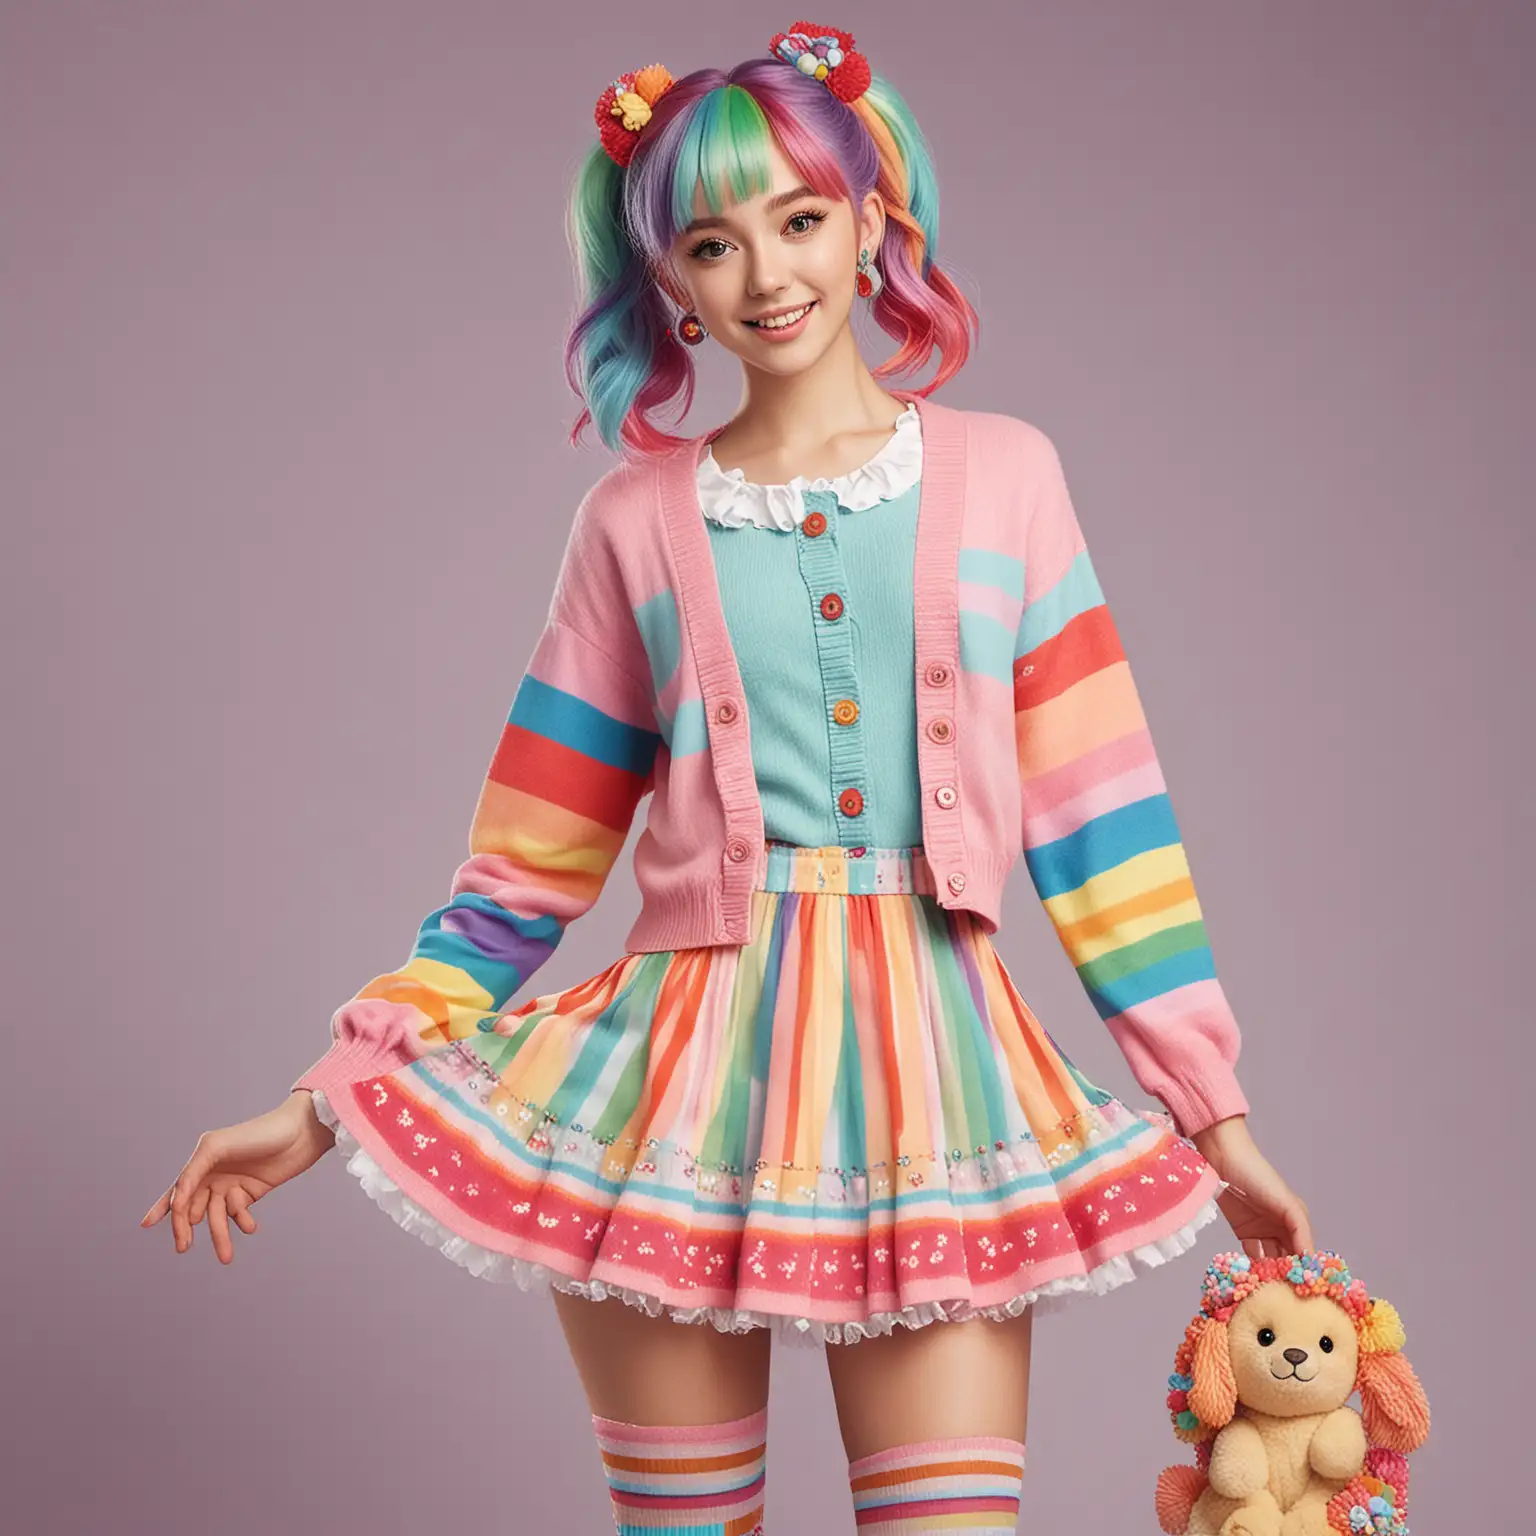 Vibrant Kawaii Style Colorful Rainbow Hair and Fashionable Outfit